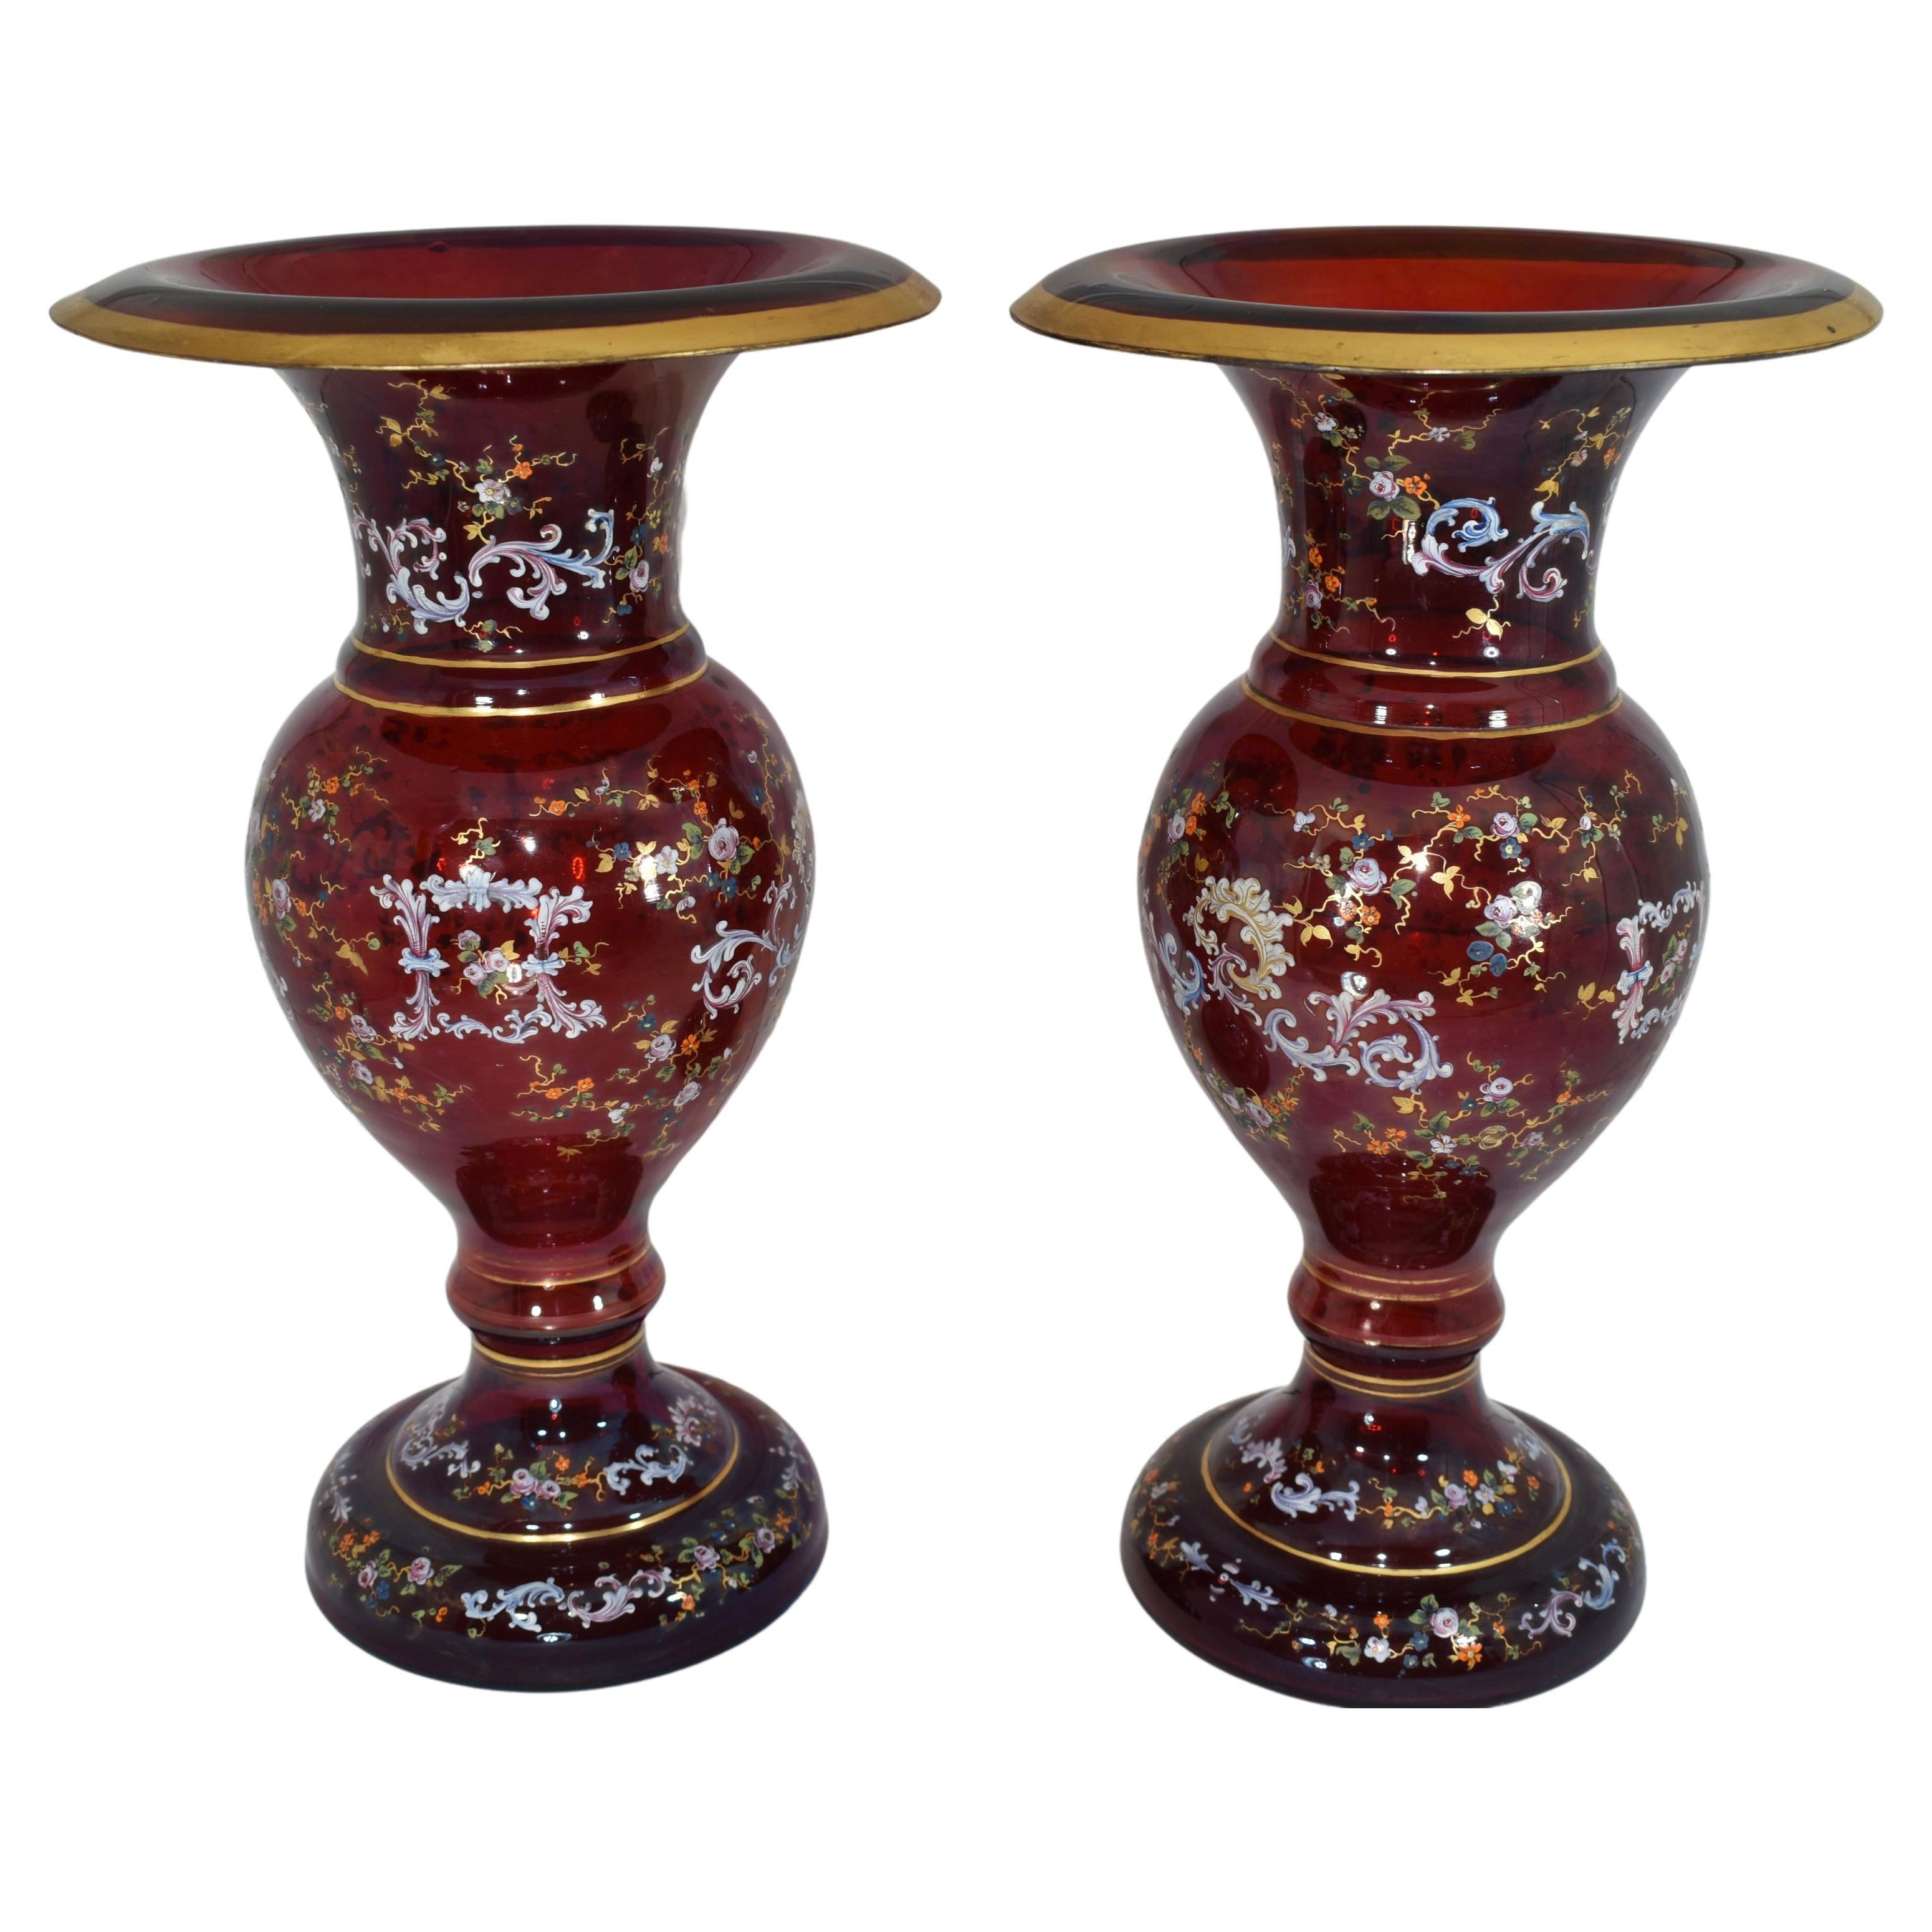 Large ruby-red glass moser vases, circural body richly decorated all around with delicate Enamel gilding, hand-painted with colorful scrollworks and flowers
Bohemia, Circa 1880